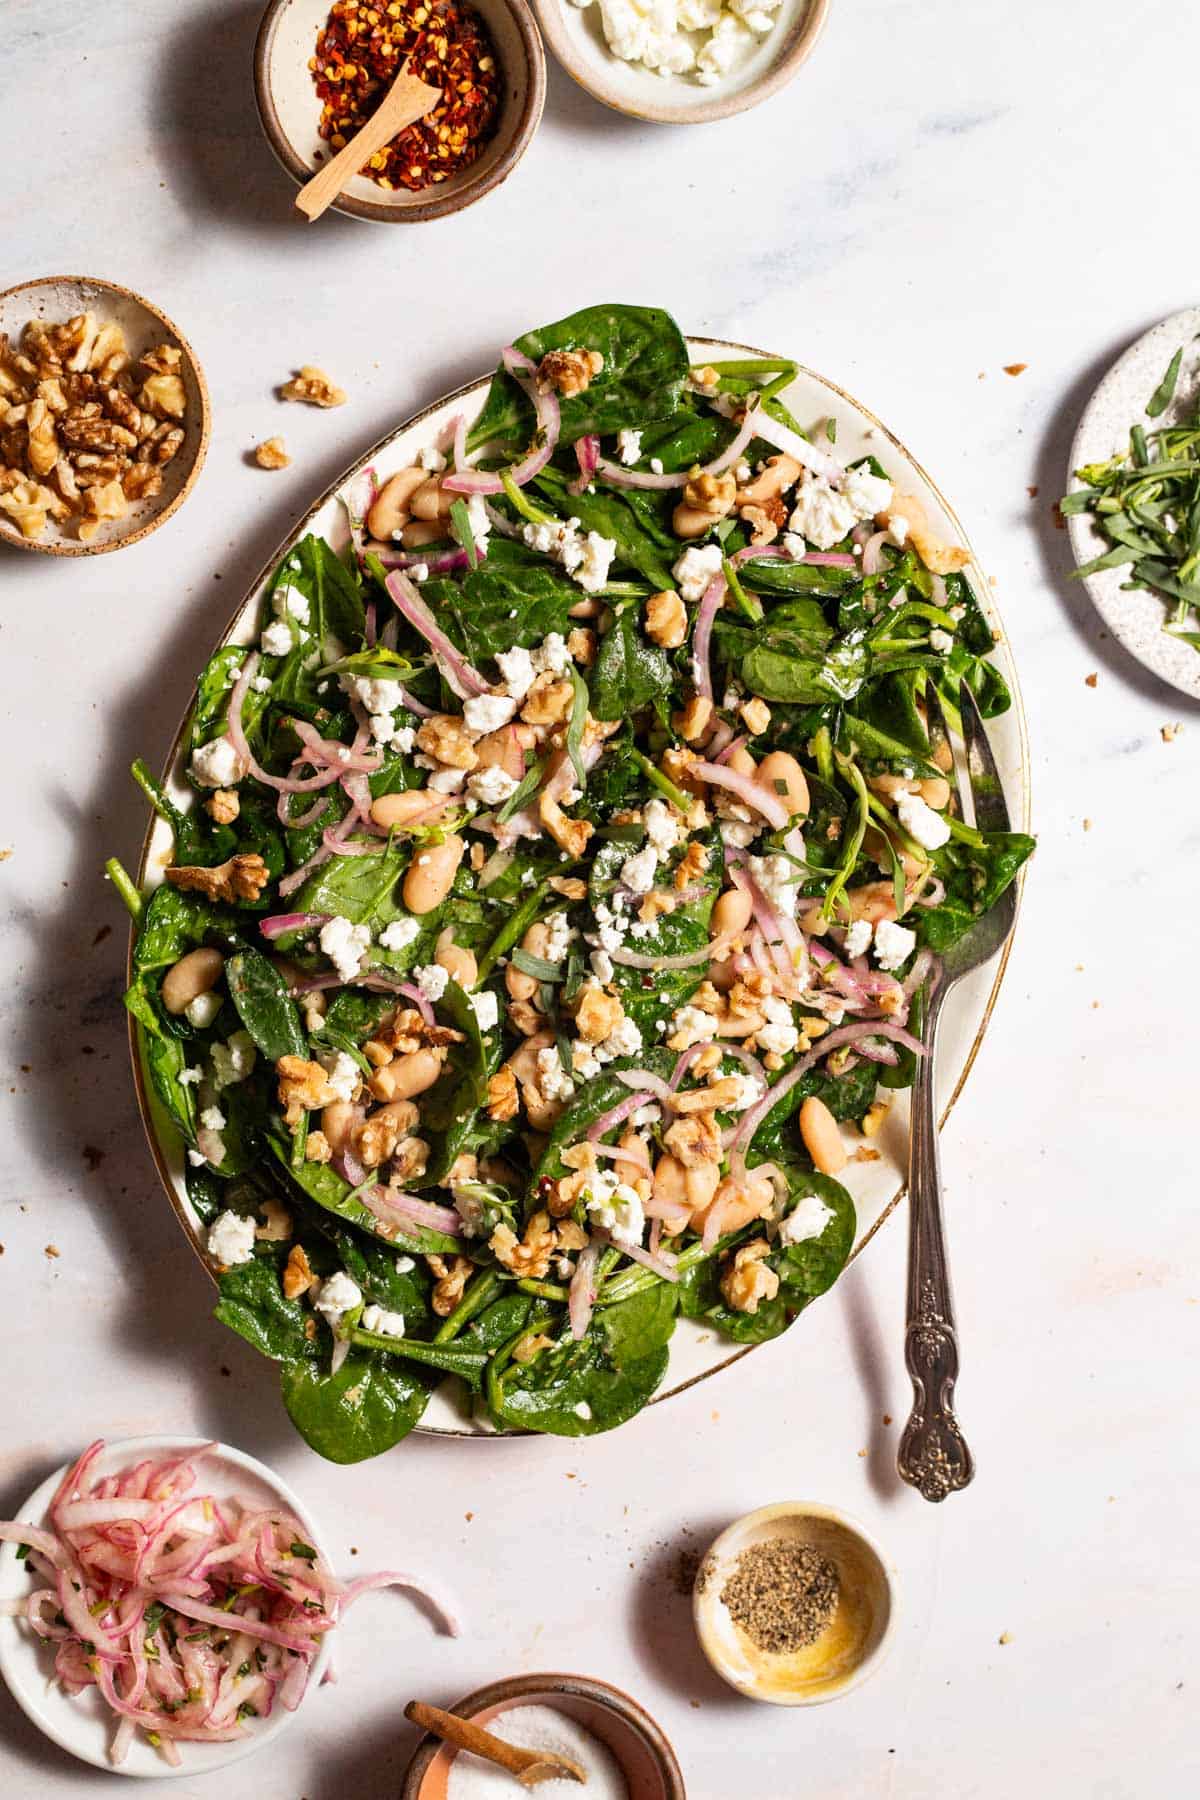 An overhead photo of the wilted spinach salad on a serving platter with a fork. Surrounding this are small bowls of salt, pepper, walnuts, pickled onions, tarragon, goat cheese, and red pepper flakes.